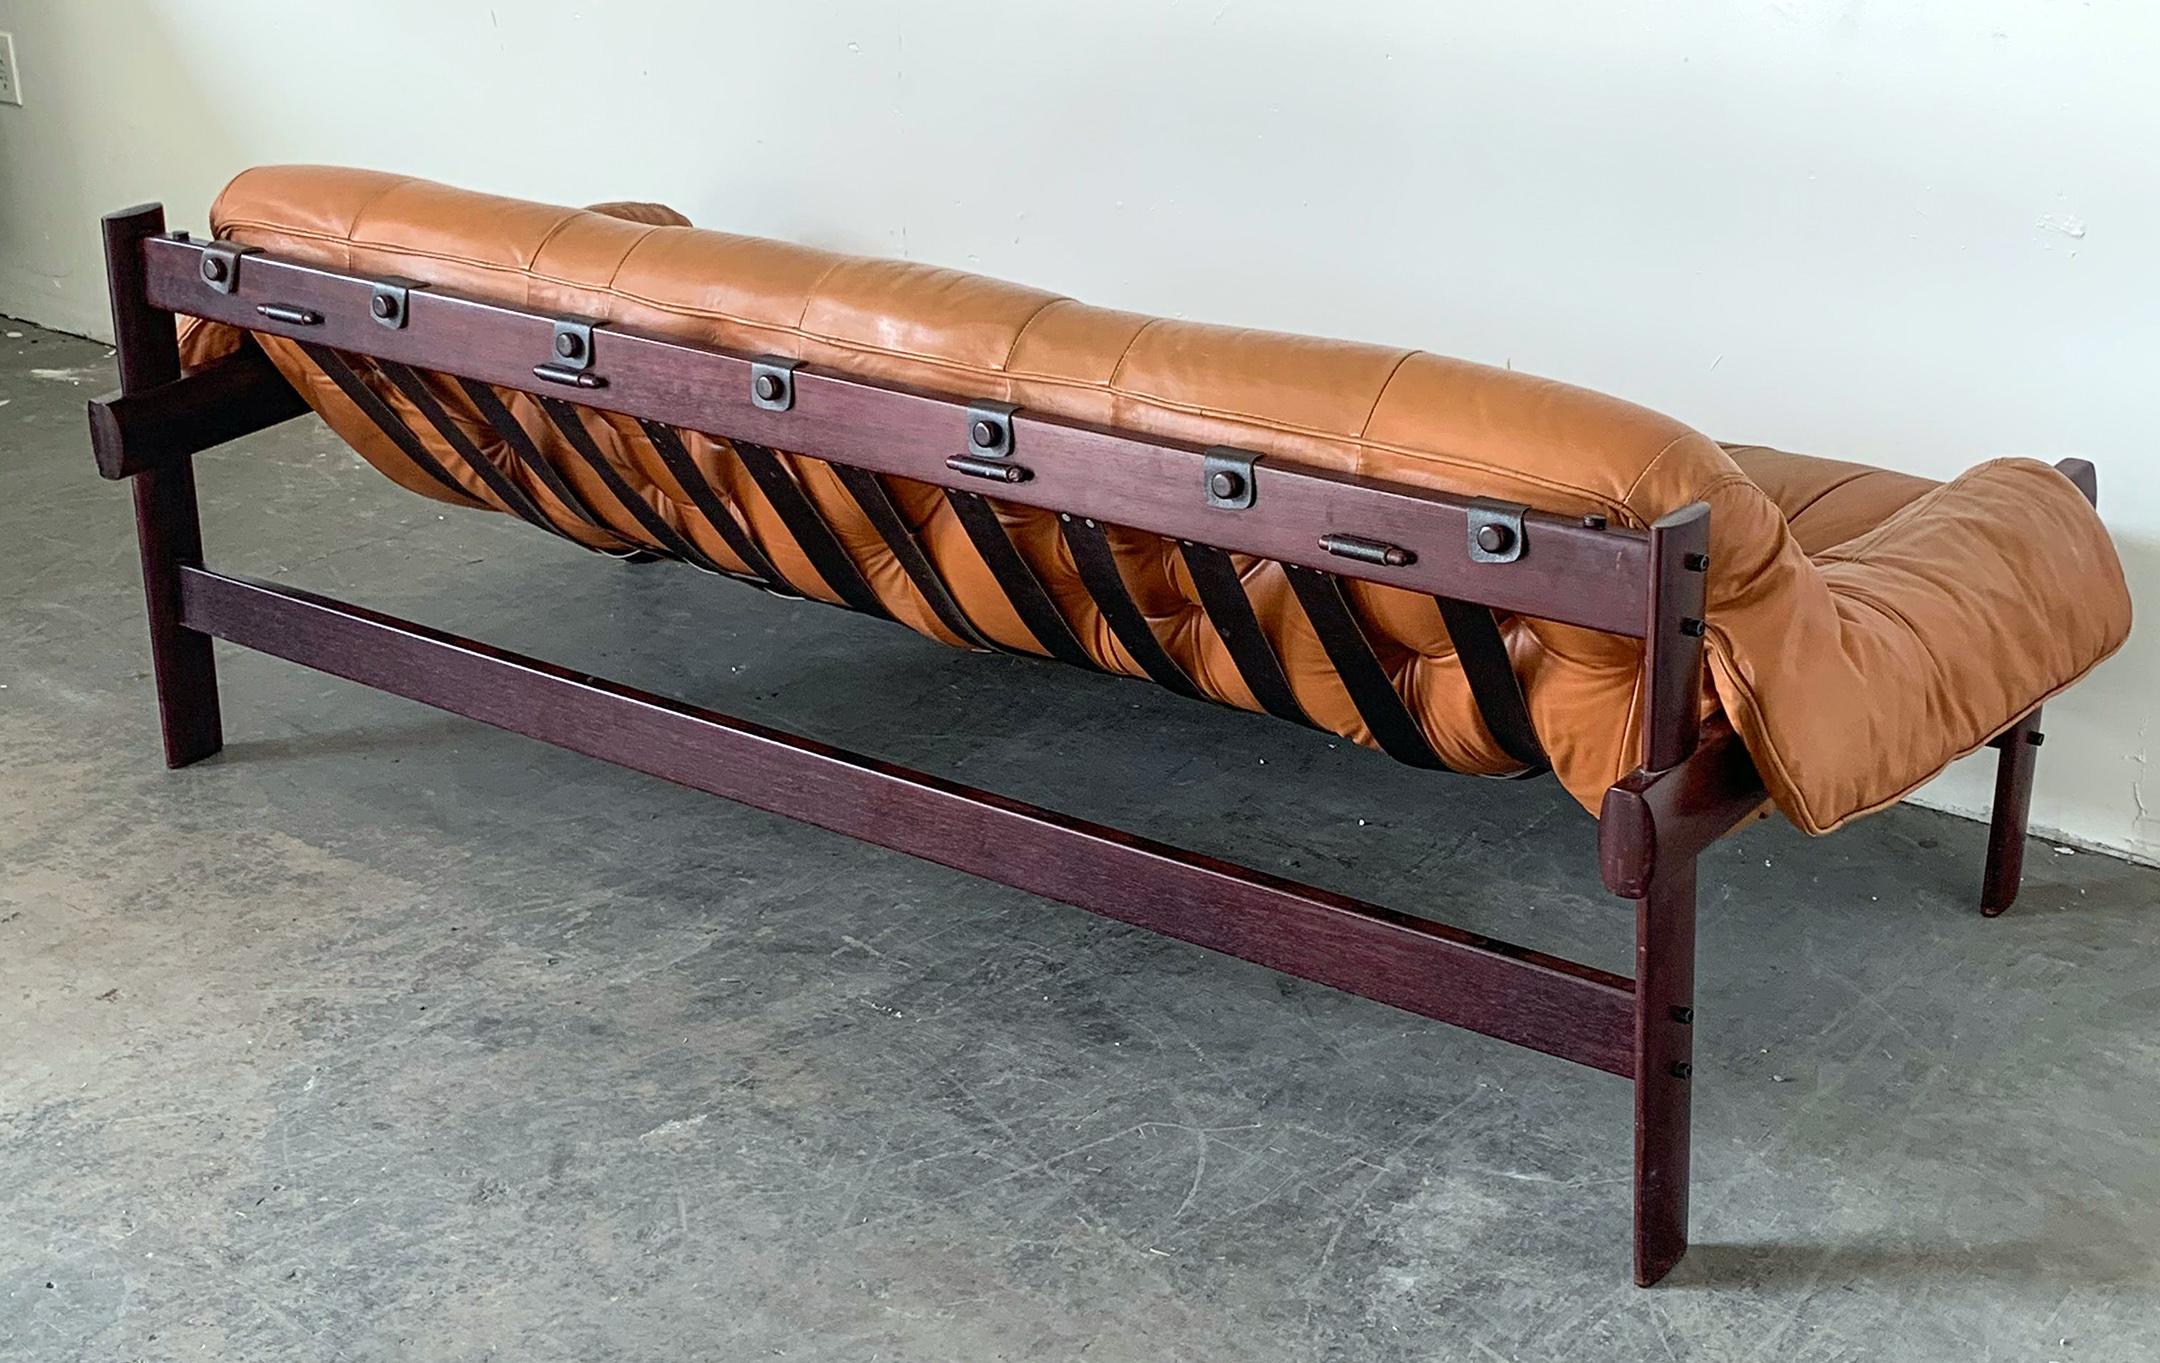 This gorgeous sofa was designed by Percival Lafer in the 1970s and is a sling style sofa. This patinated cognac leather sofa is definitely set off right with its rosewood frame and leather strapping along its back. This is definitely a sofa that